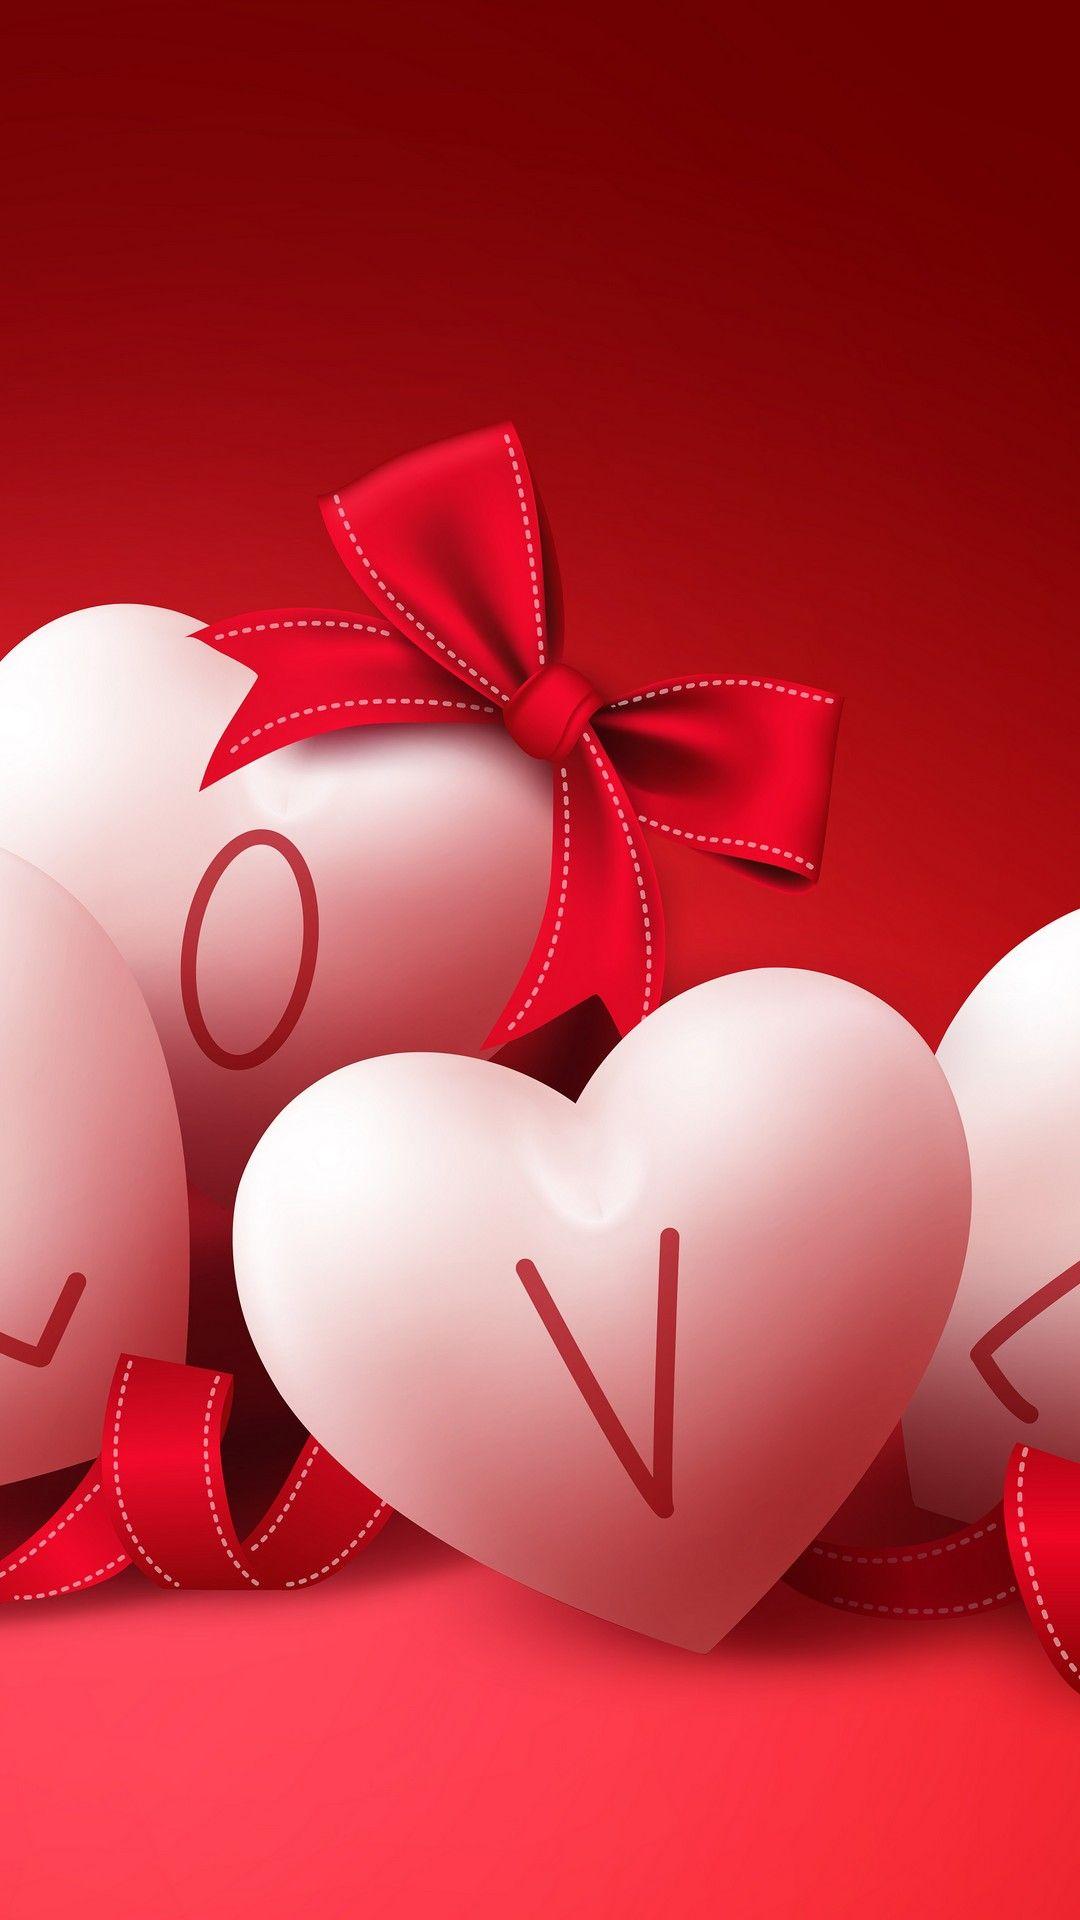 Mobile Love Wallpapers - Top Free Mobile Love Backgrounds - WallpaperAccess